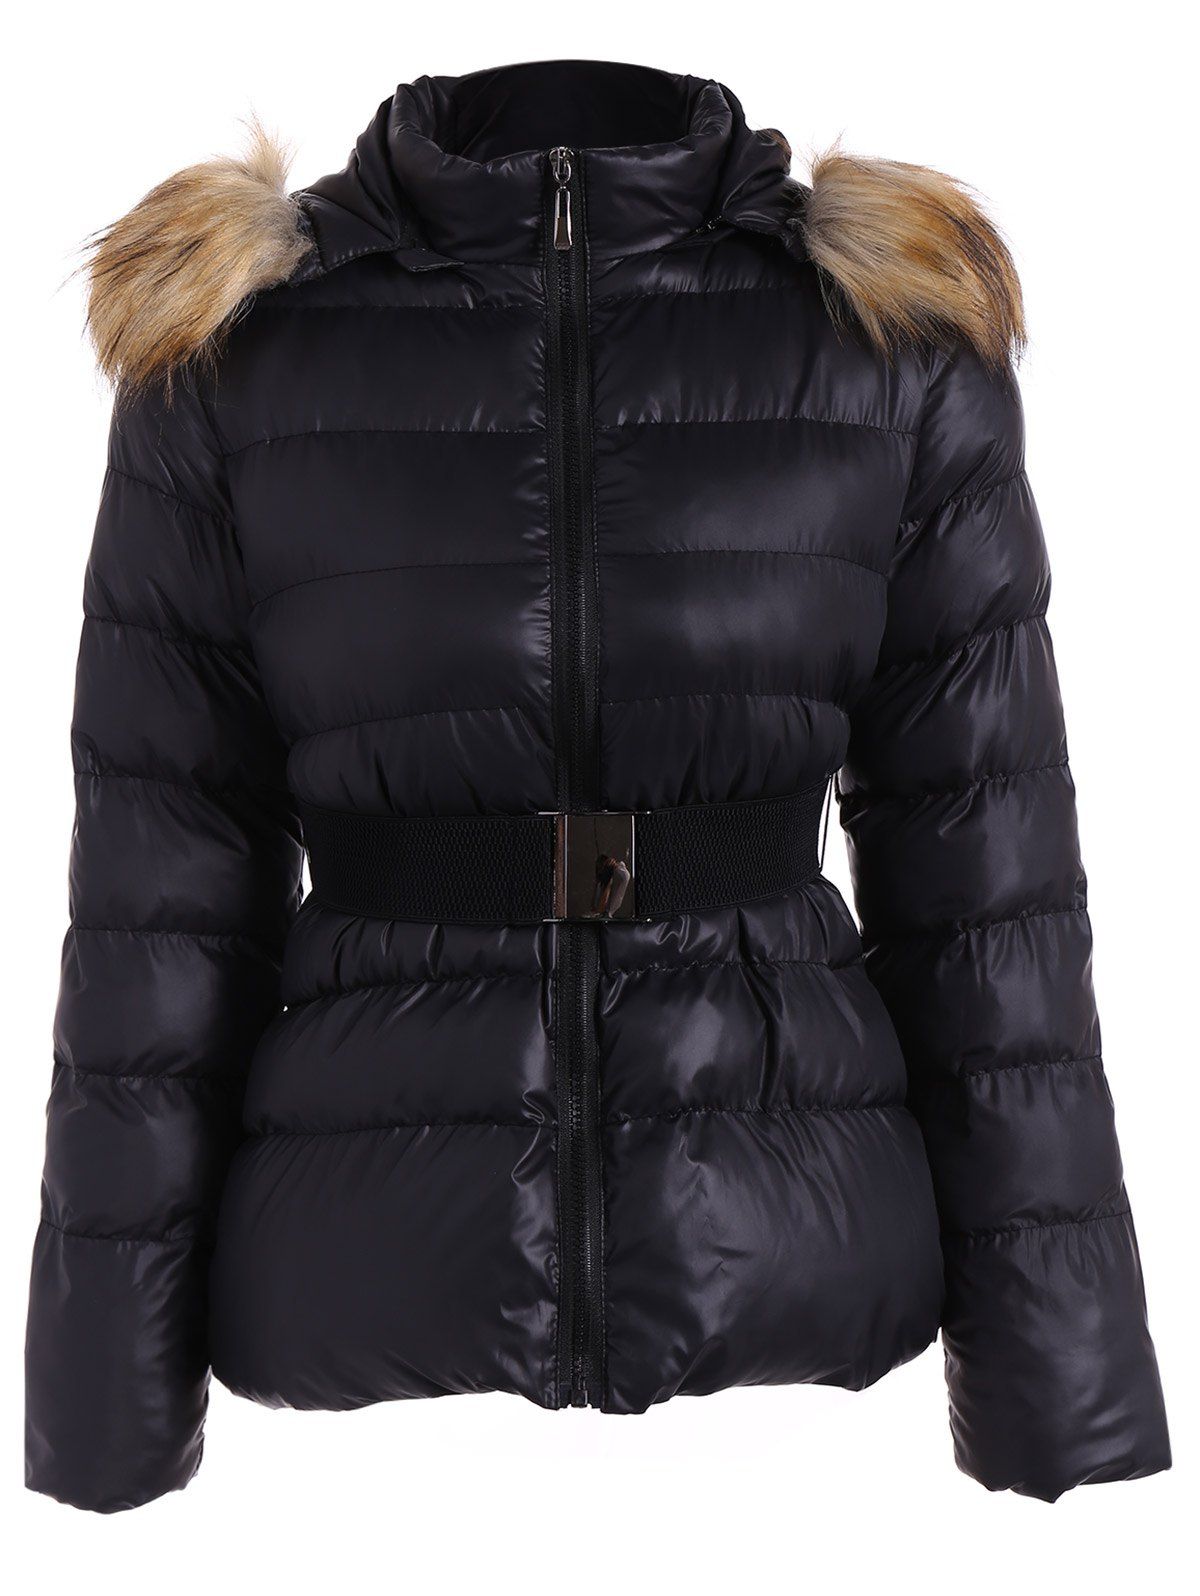 Belted Furry Hooded Winter Puffer Jacket - BLACK M